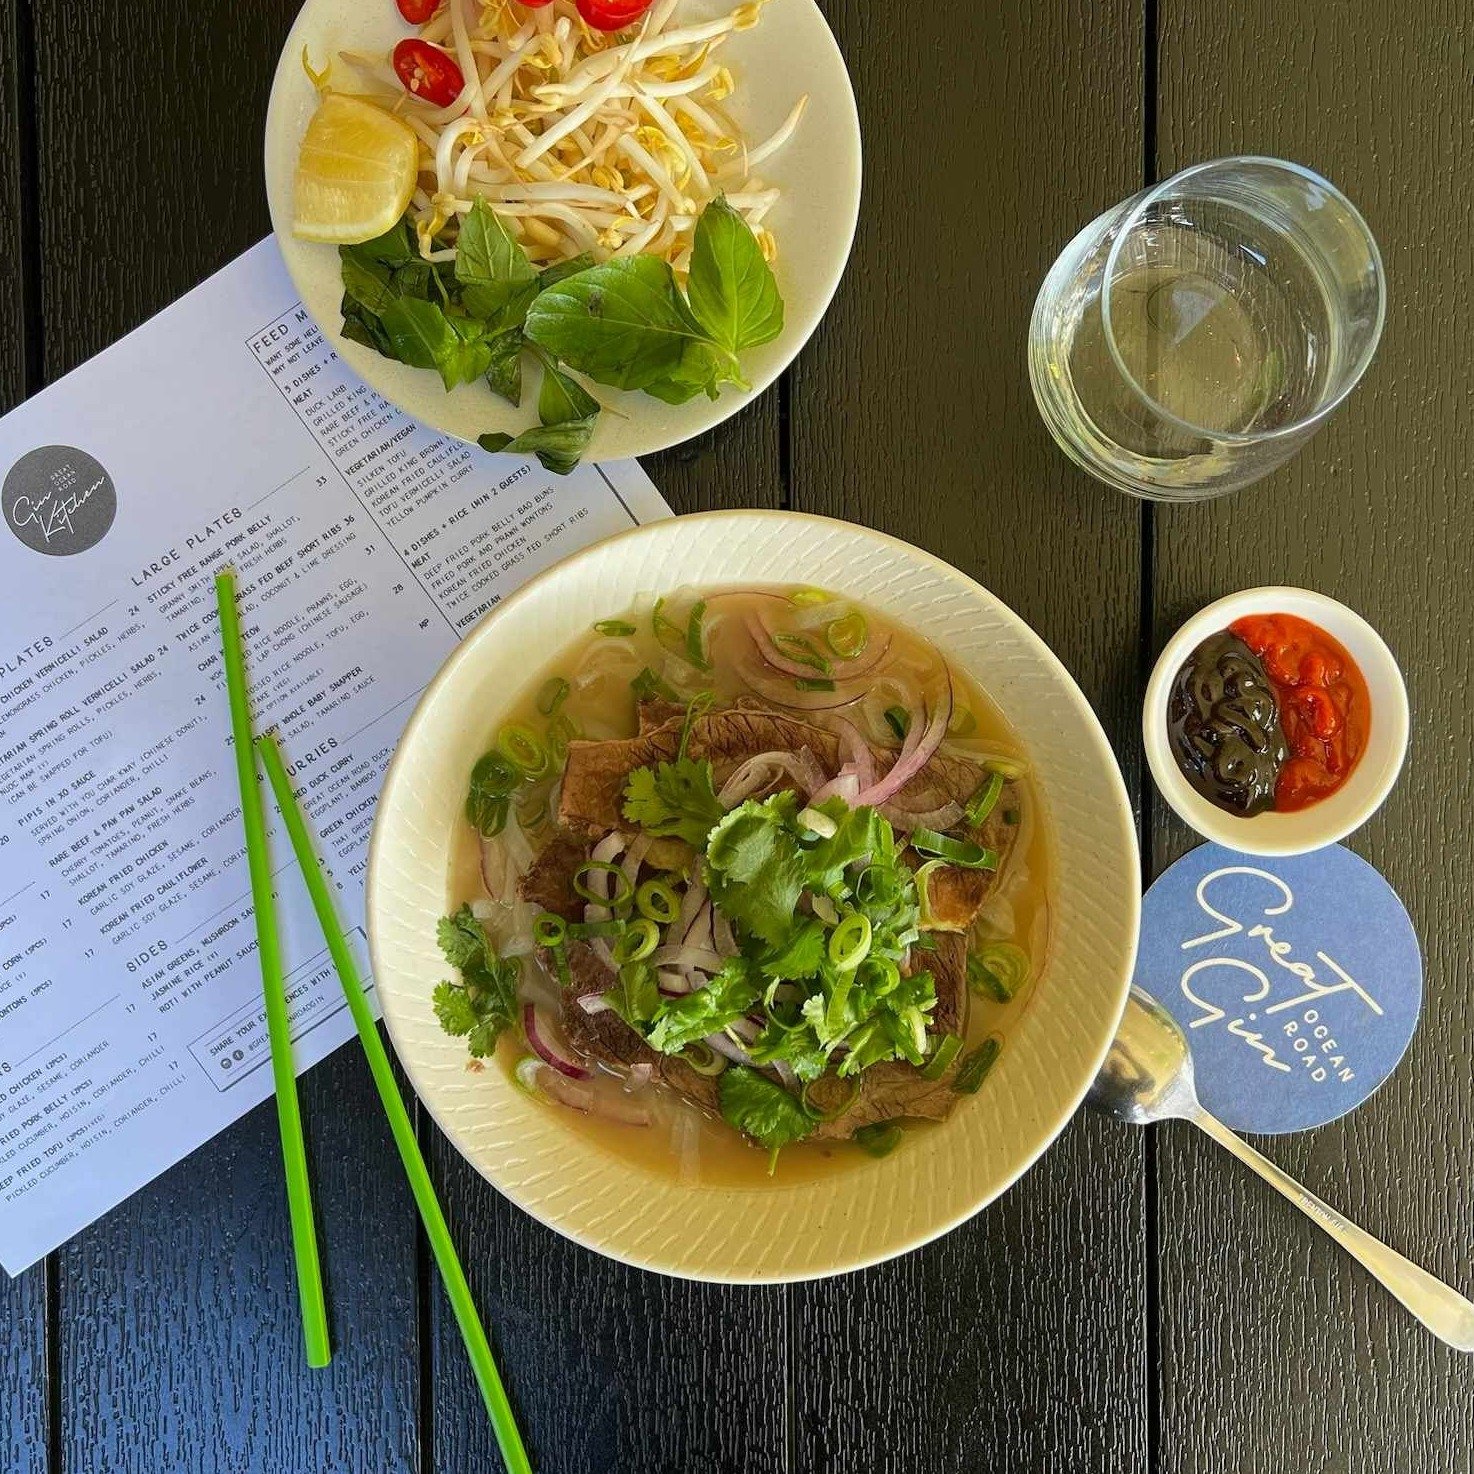 Pho Sundays are here! 🍜
Warm up with a bowl of pho, 2 spring rolls &amp; a G&amp;T for just $30 during lunch service only. 
Book your spot!